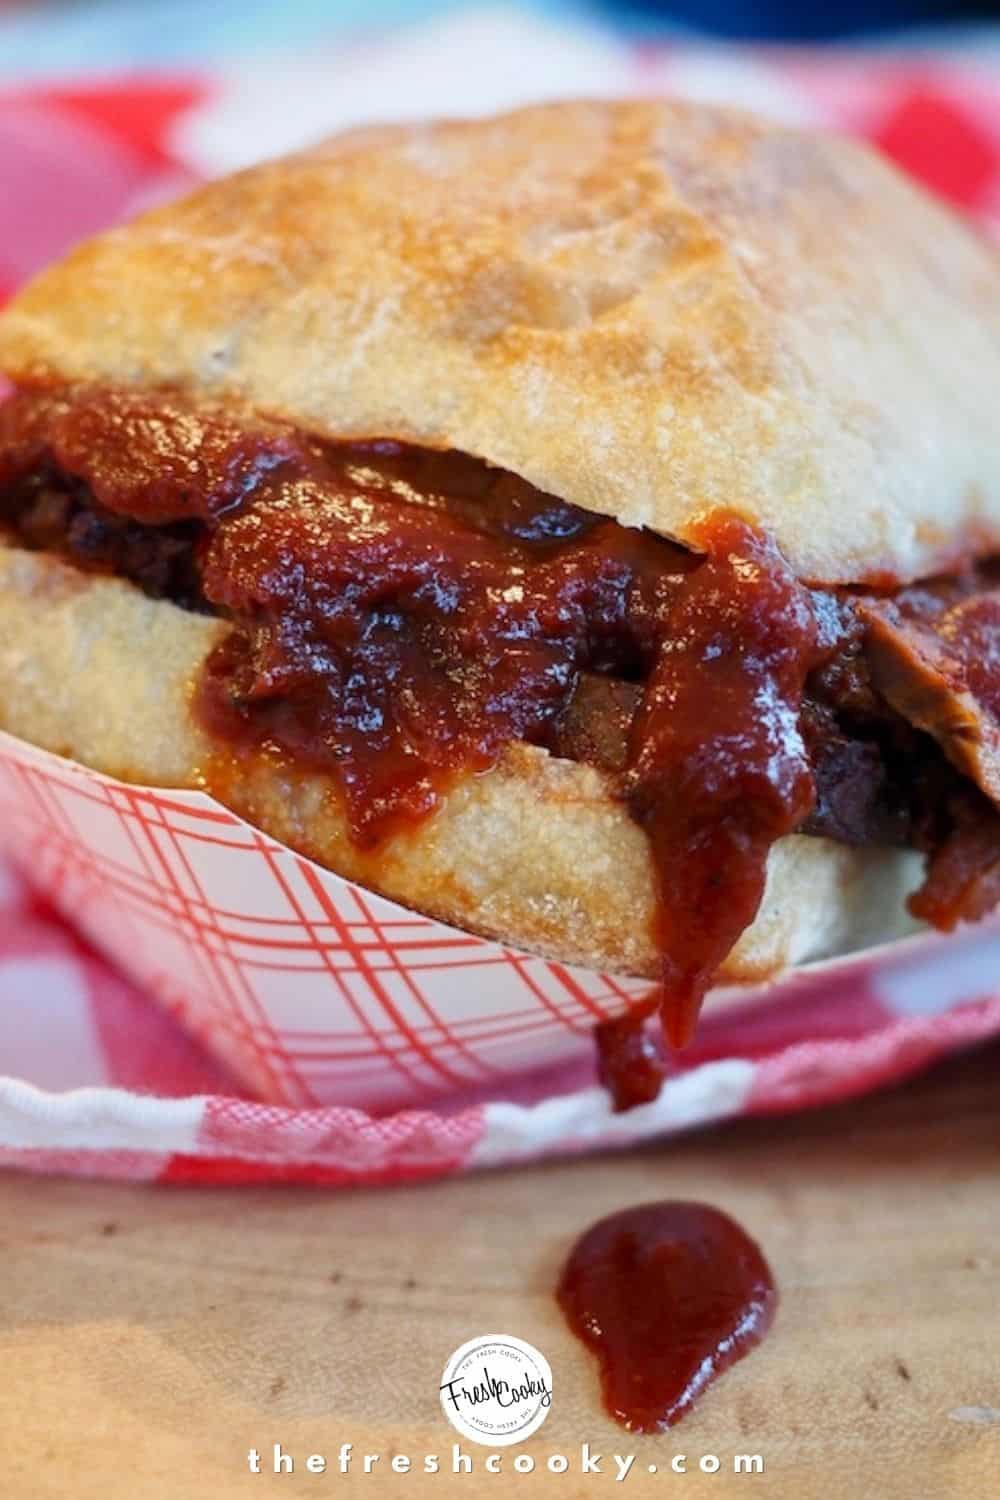 Pinterest Image ciabatta roll, stuffed with barbecue beef brisket sandwich with a drip of bbq sauce on wooden board. sitting on red and white checked napkin.